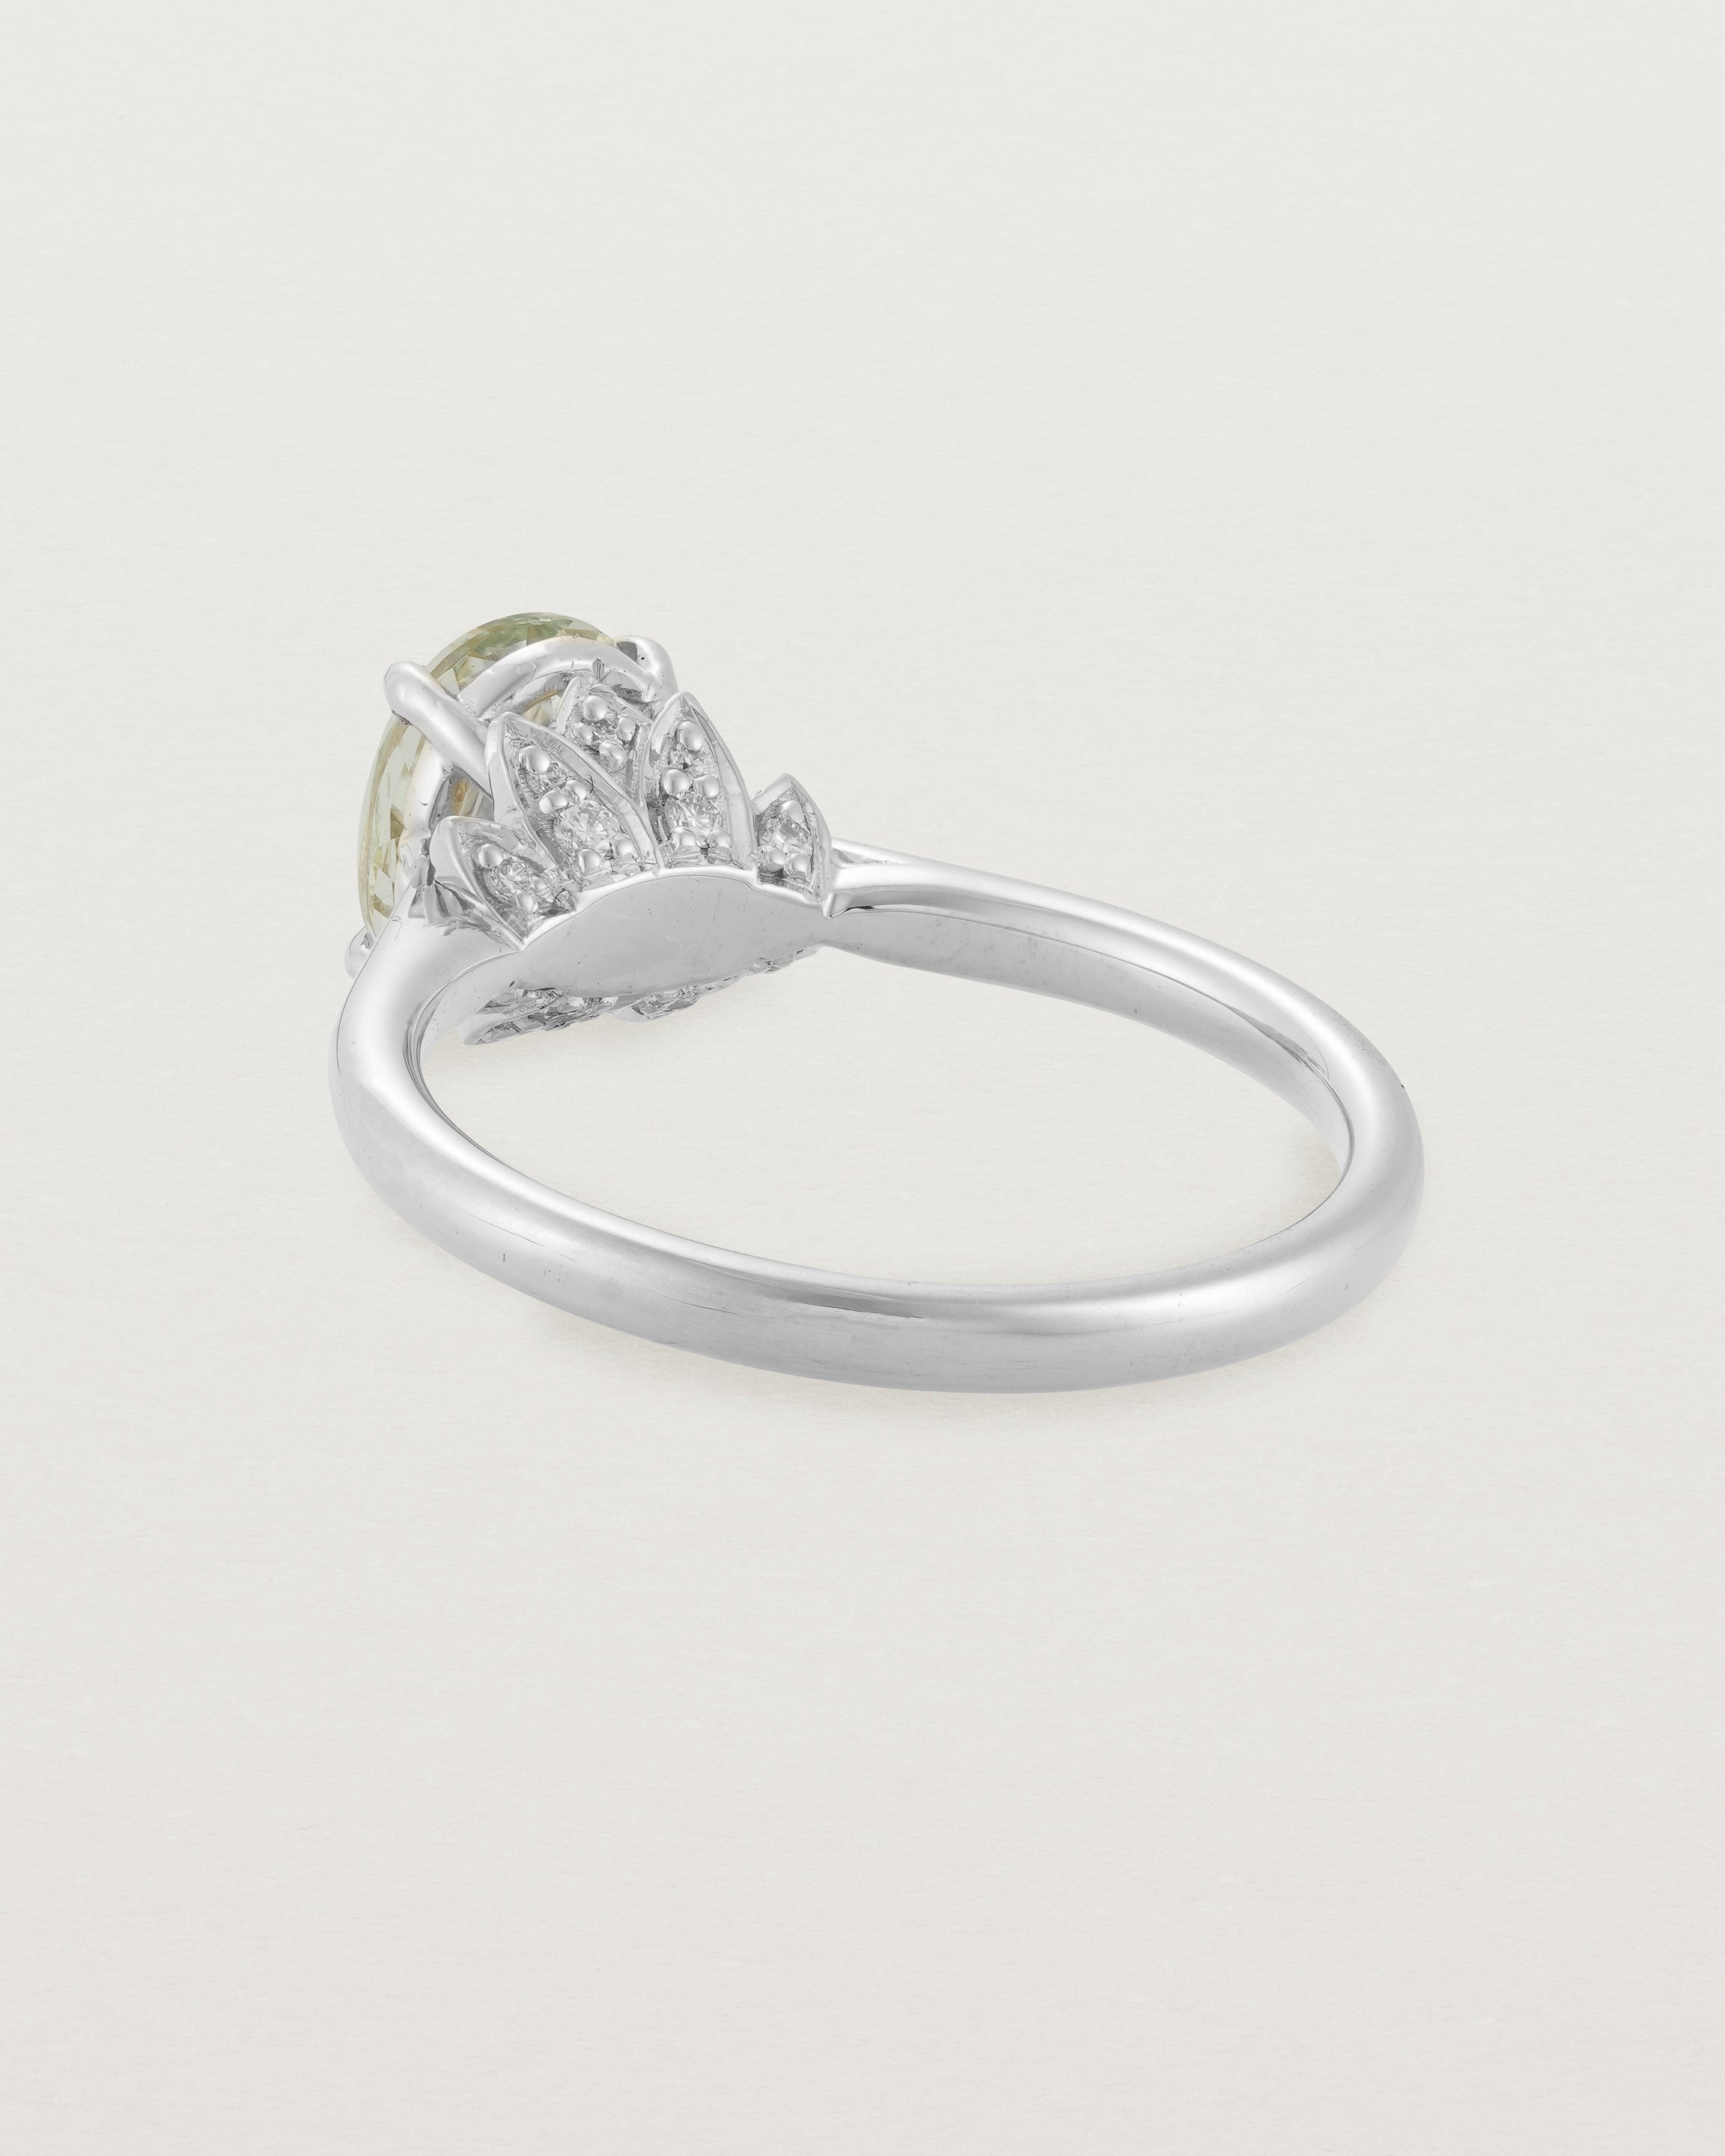 Back view of the Kalina Oval Solitaire | Green Amethyst | White Gold.